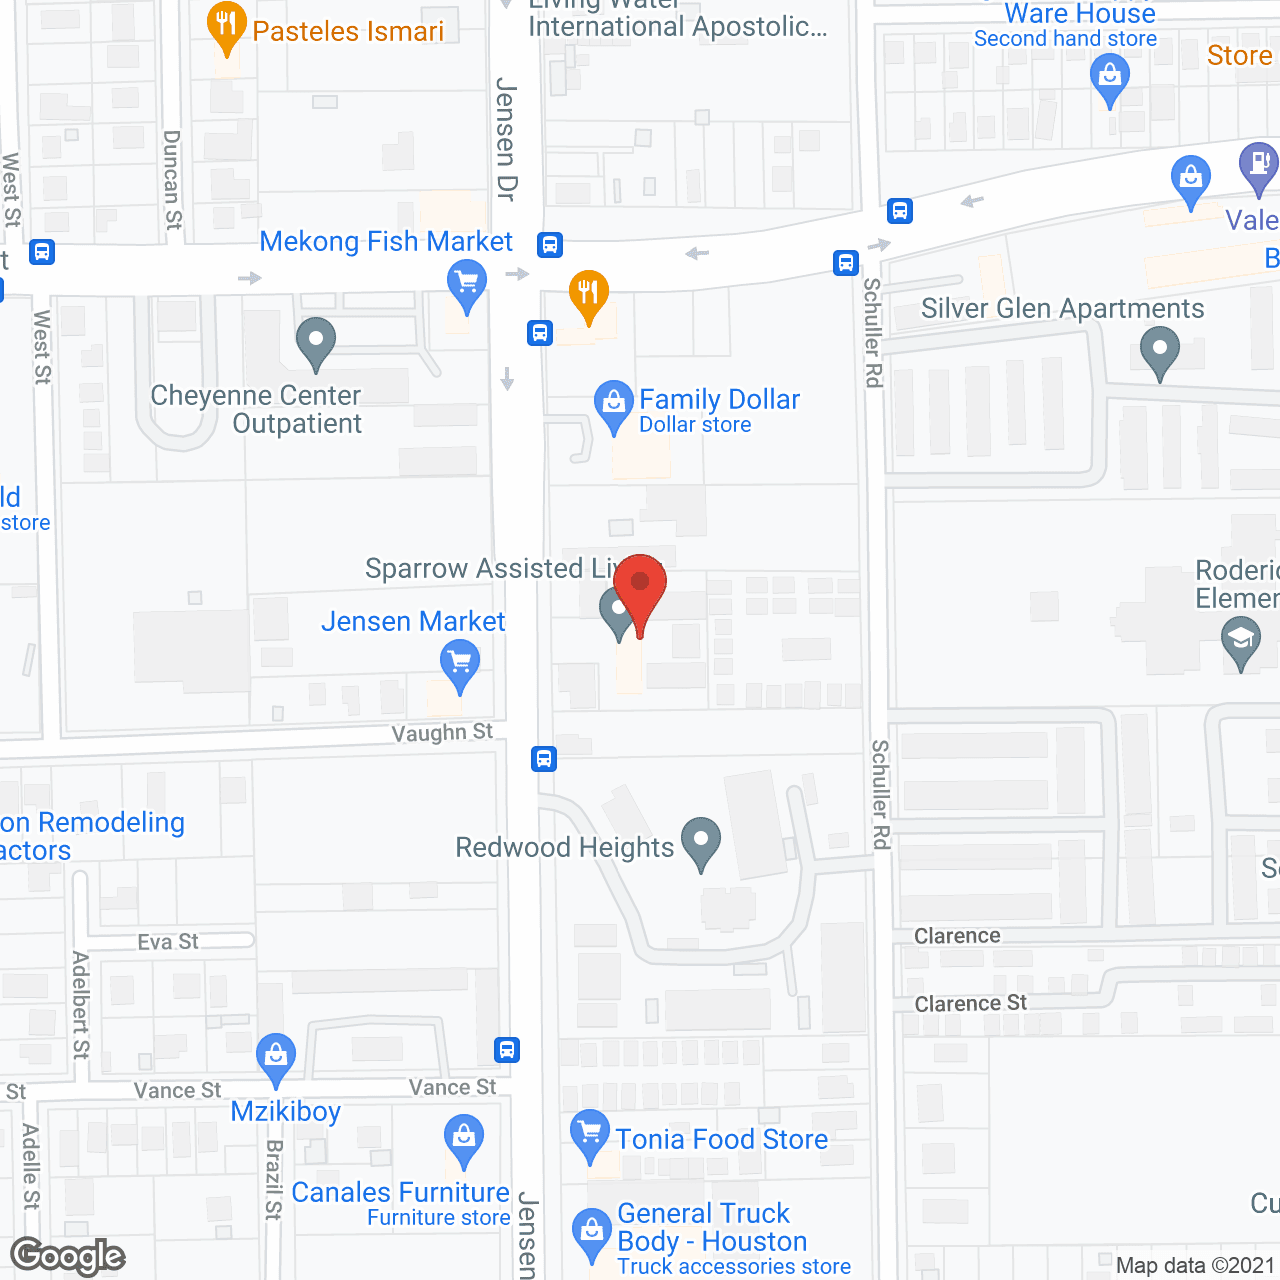 Sparrow Assisted Living in google map